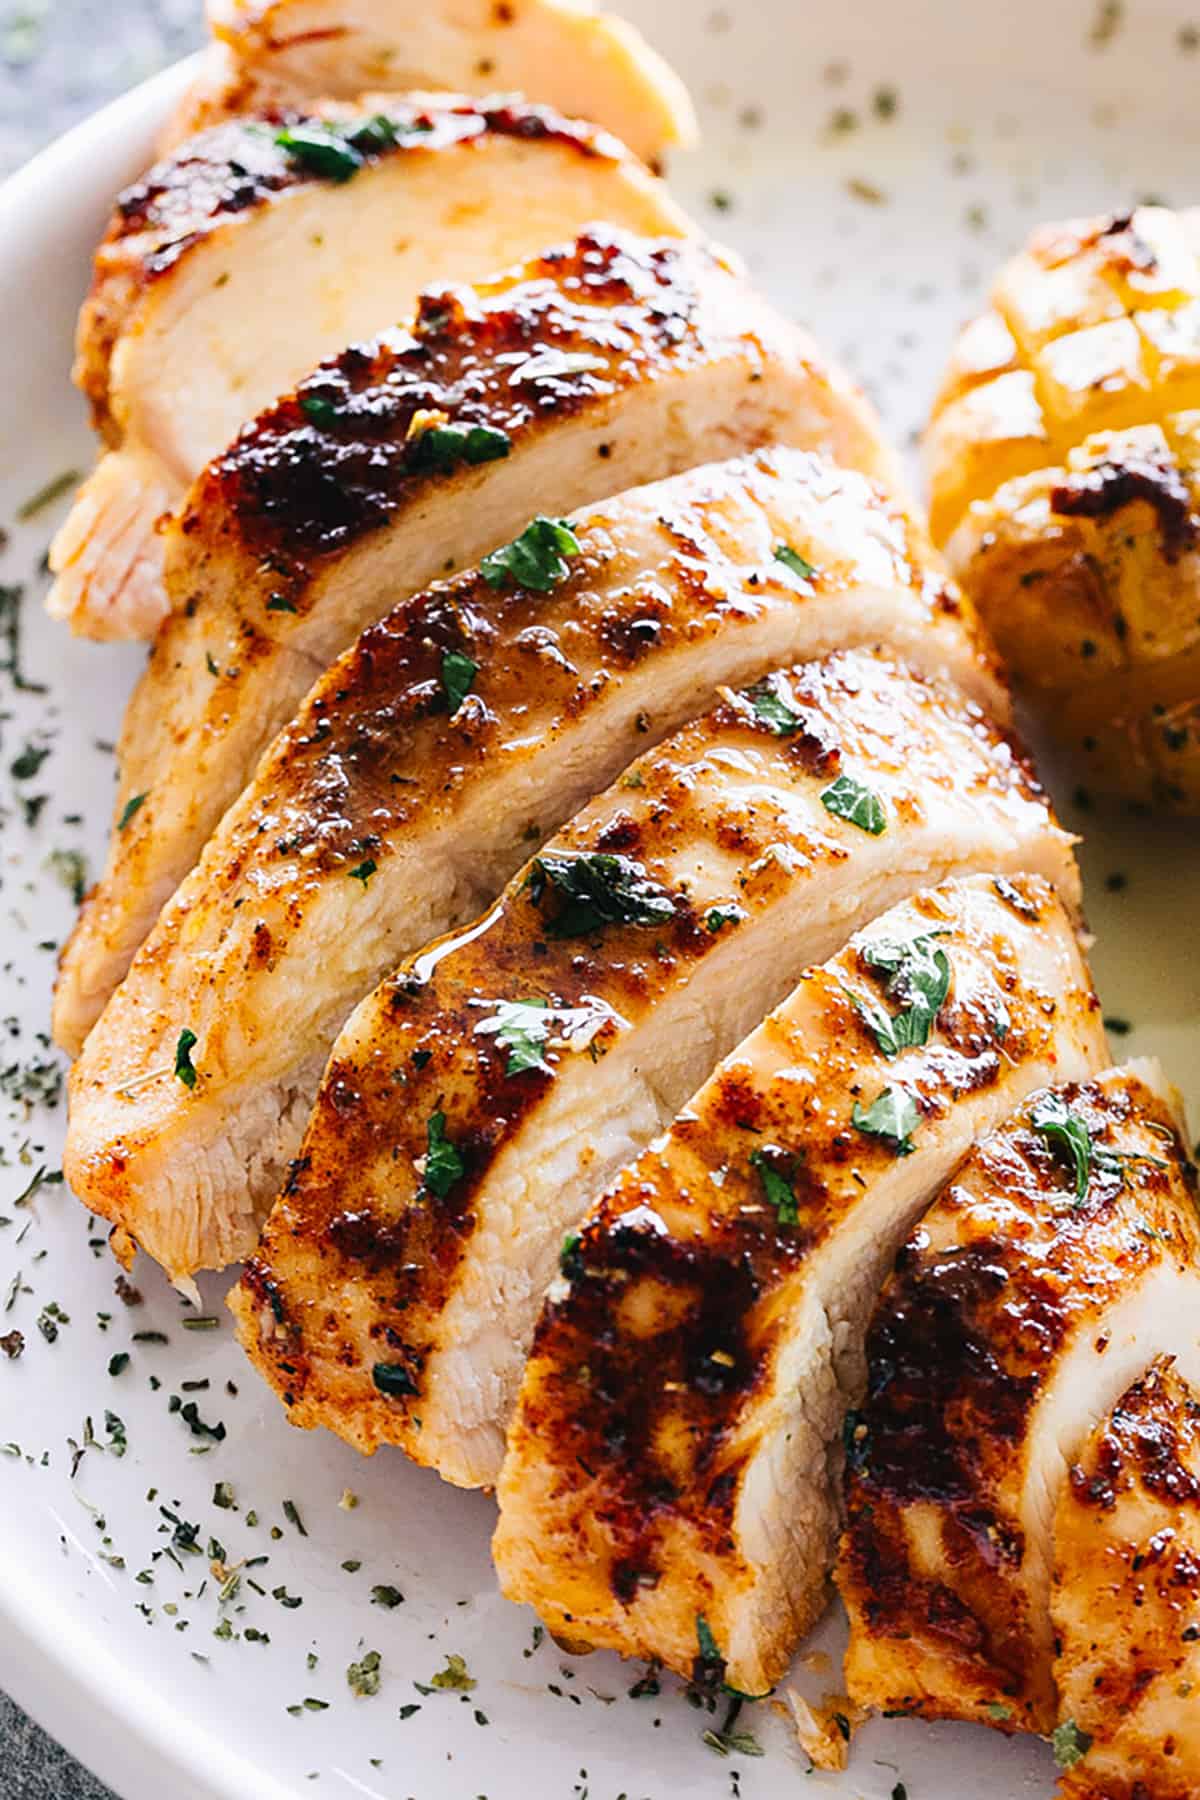 oven roasted chicken breast cut into horizontal slices and set on a white dinner plate.